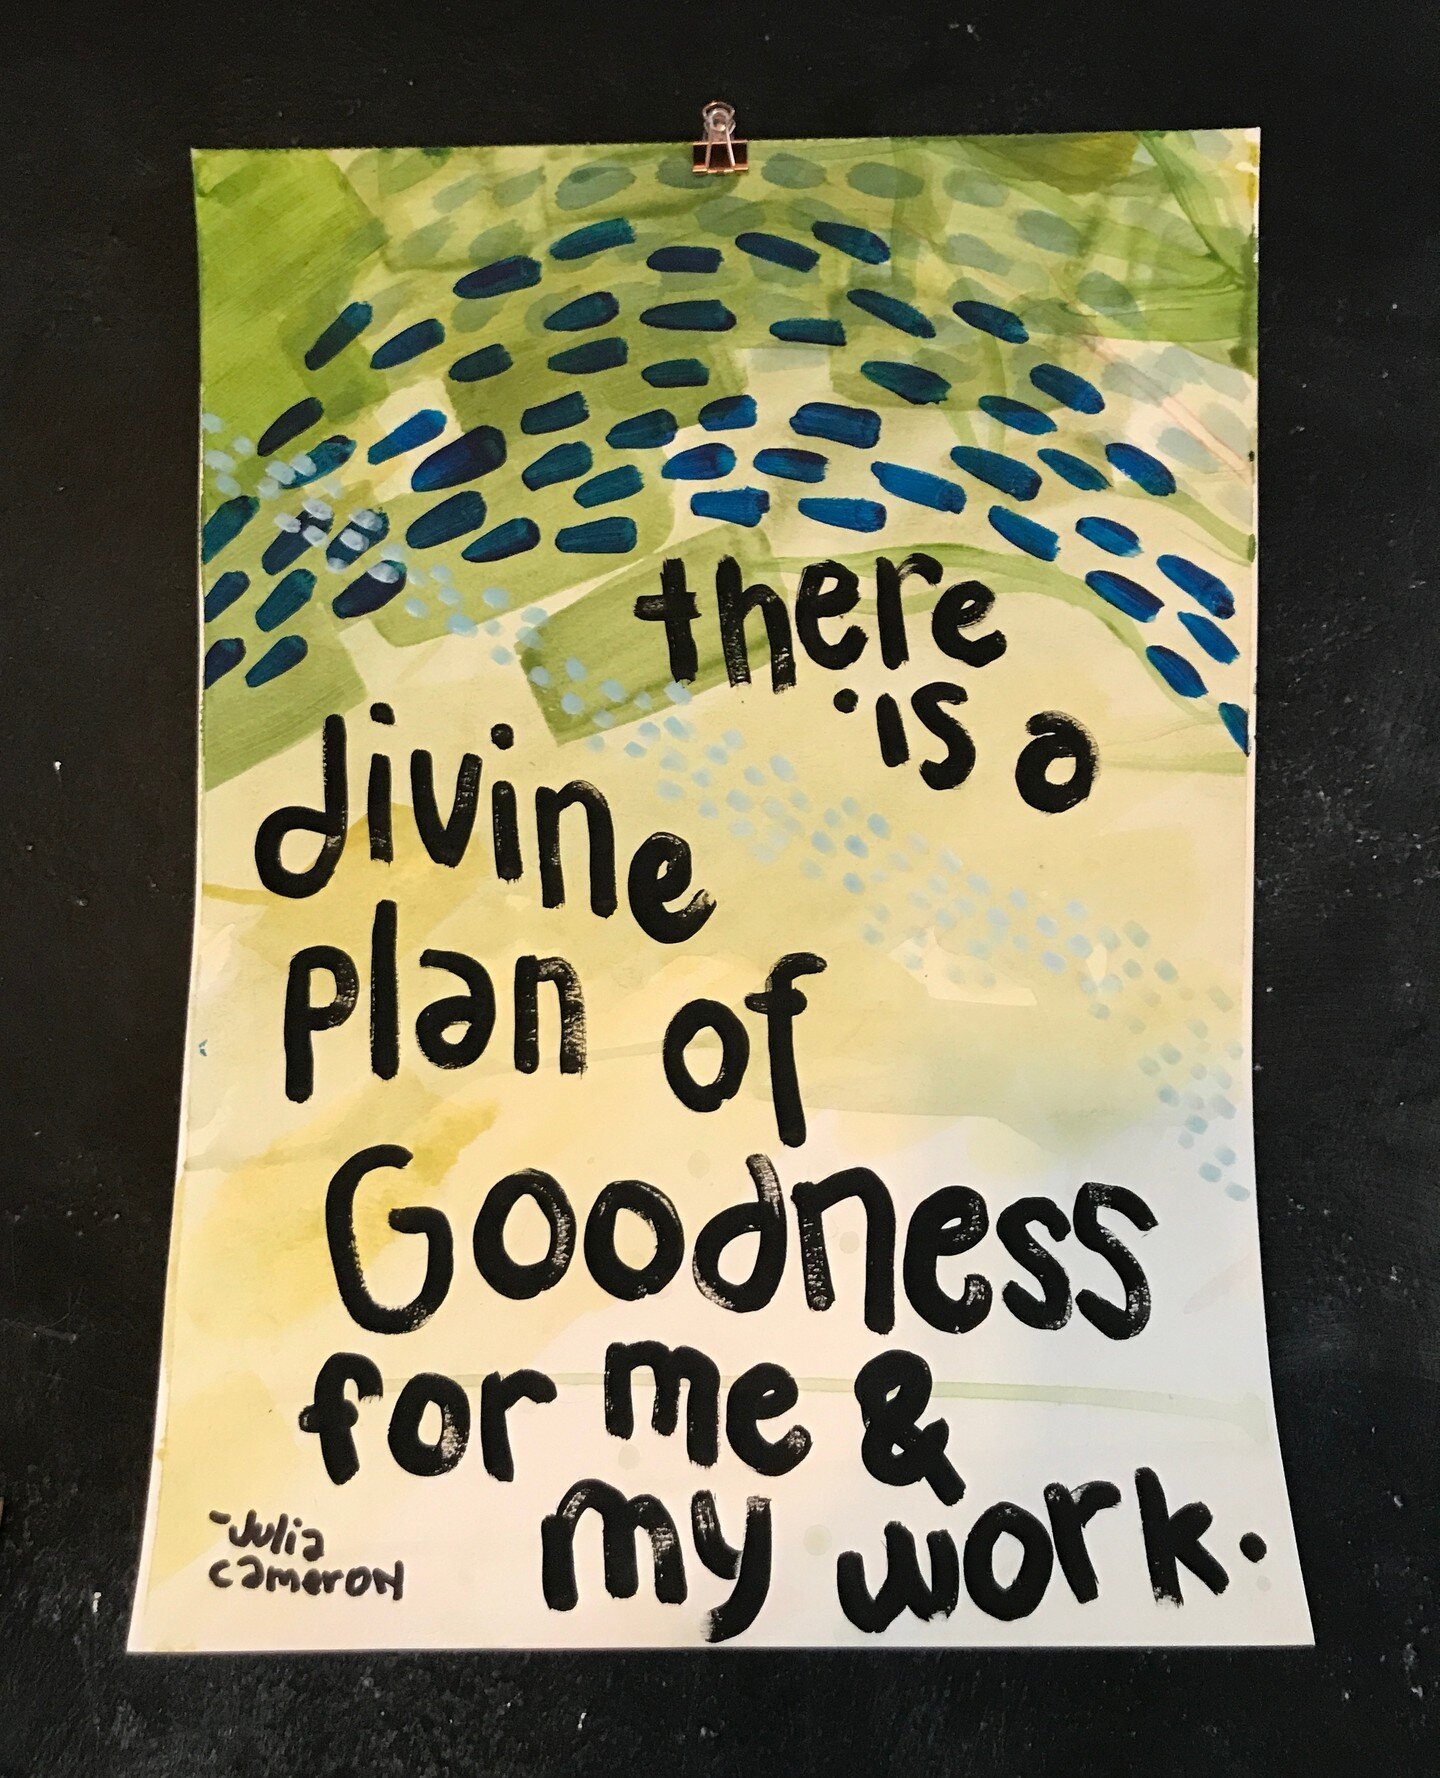 Another that I maybe never meditated on too much until recently...there is a plan for goodness around. ⁠
⁠
Links in Etsy for sending encouragement to your favorite artist or artist in training!⁠
⁠
⁠
#artisticaffirmations #juliacameron #theartistsway 